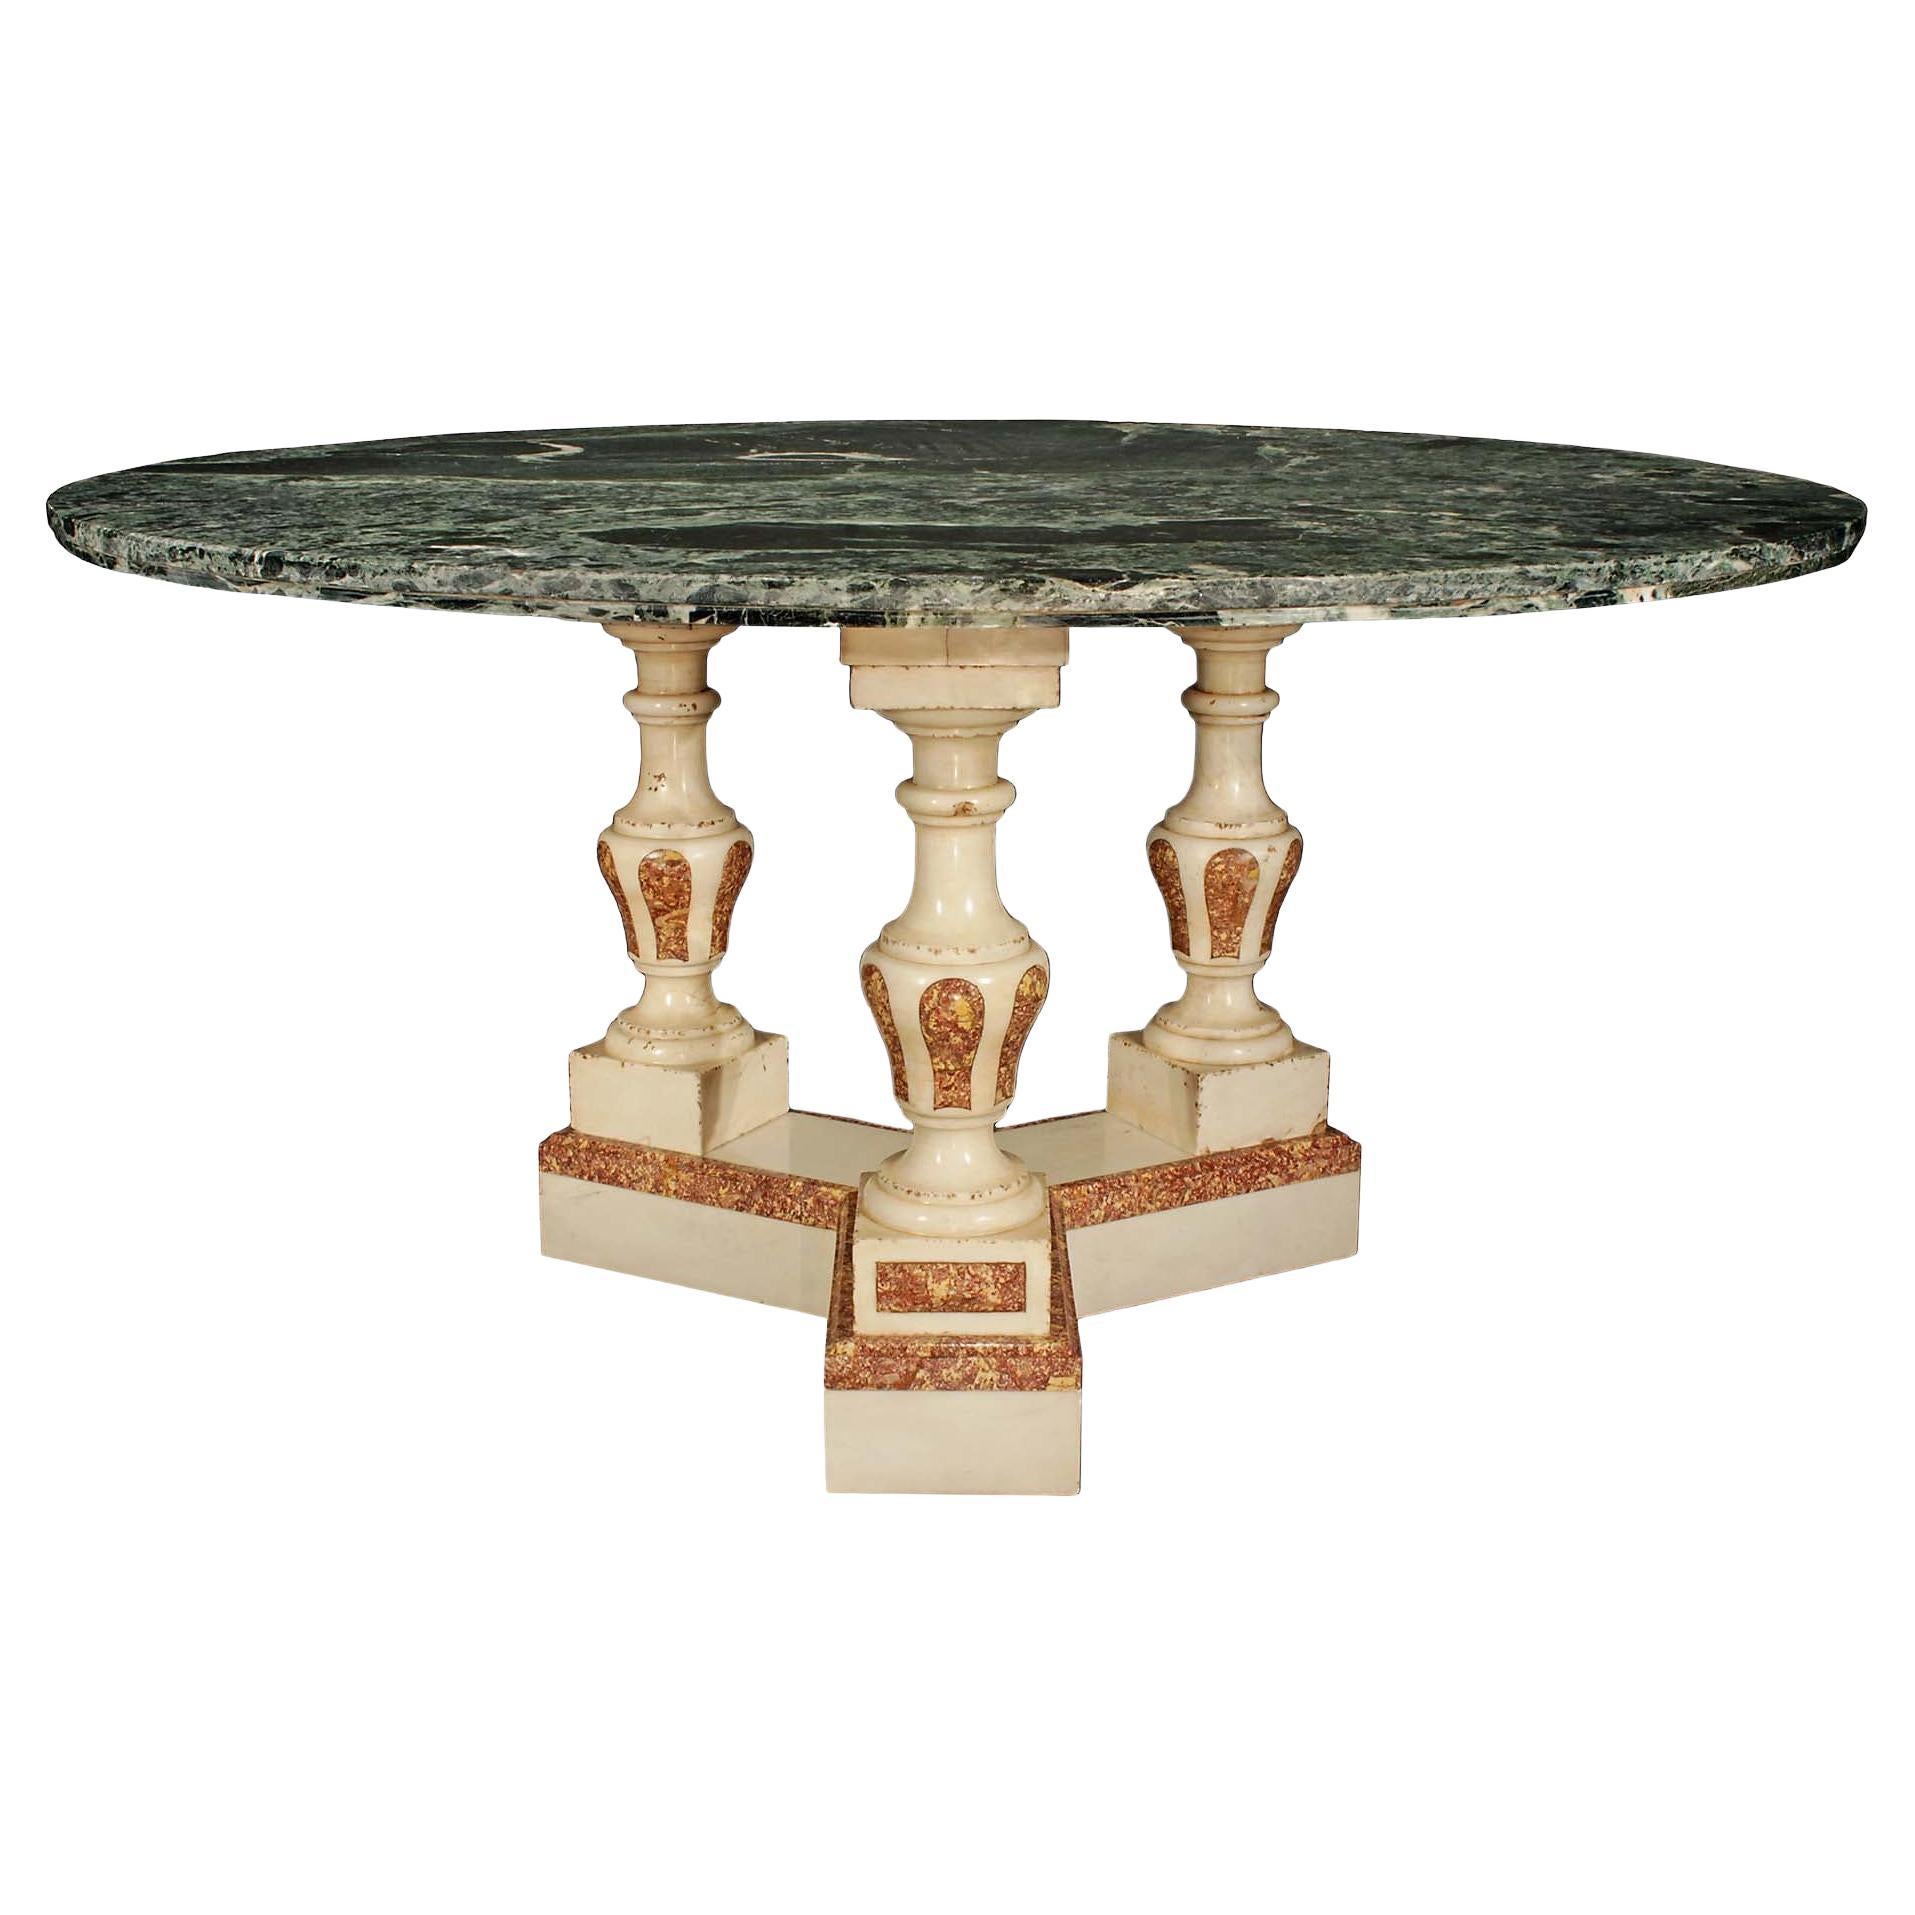 Italian 19th Century Neoclassical Style Marble Center Table For Sale